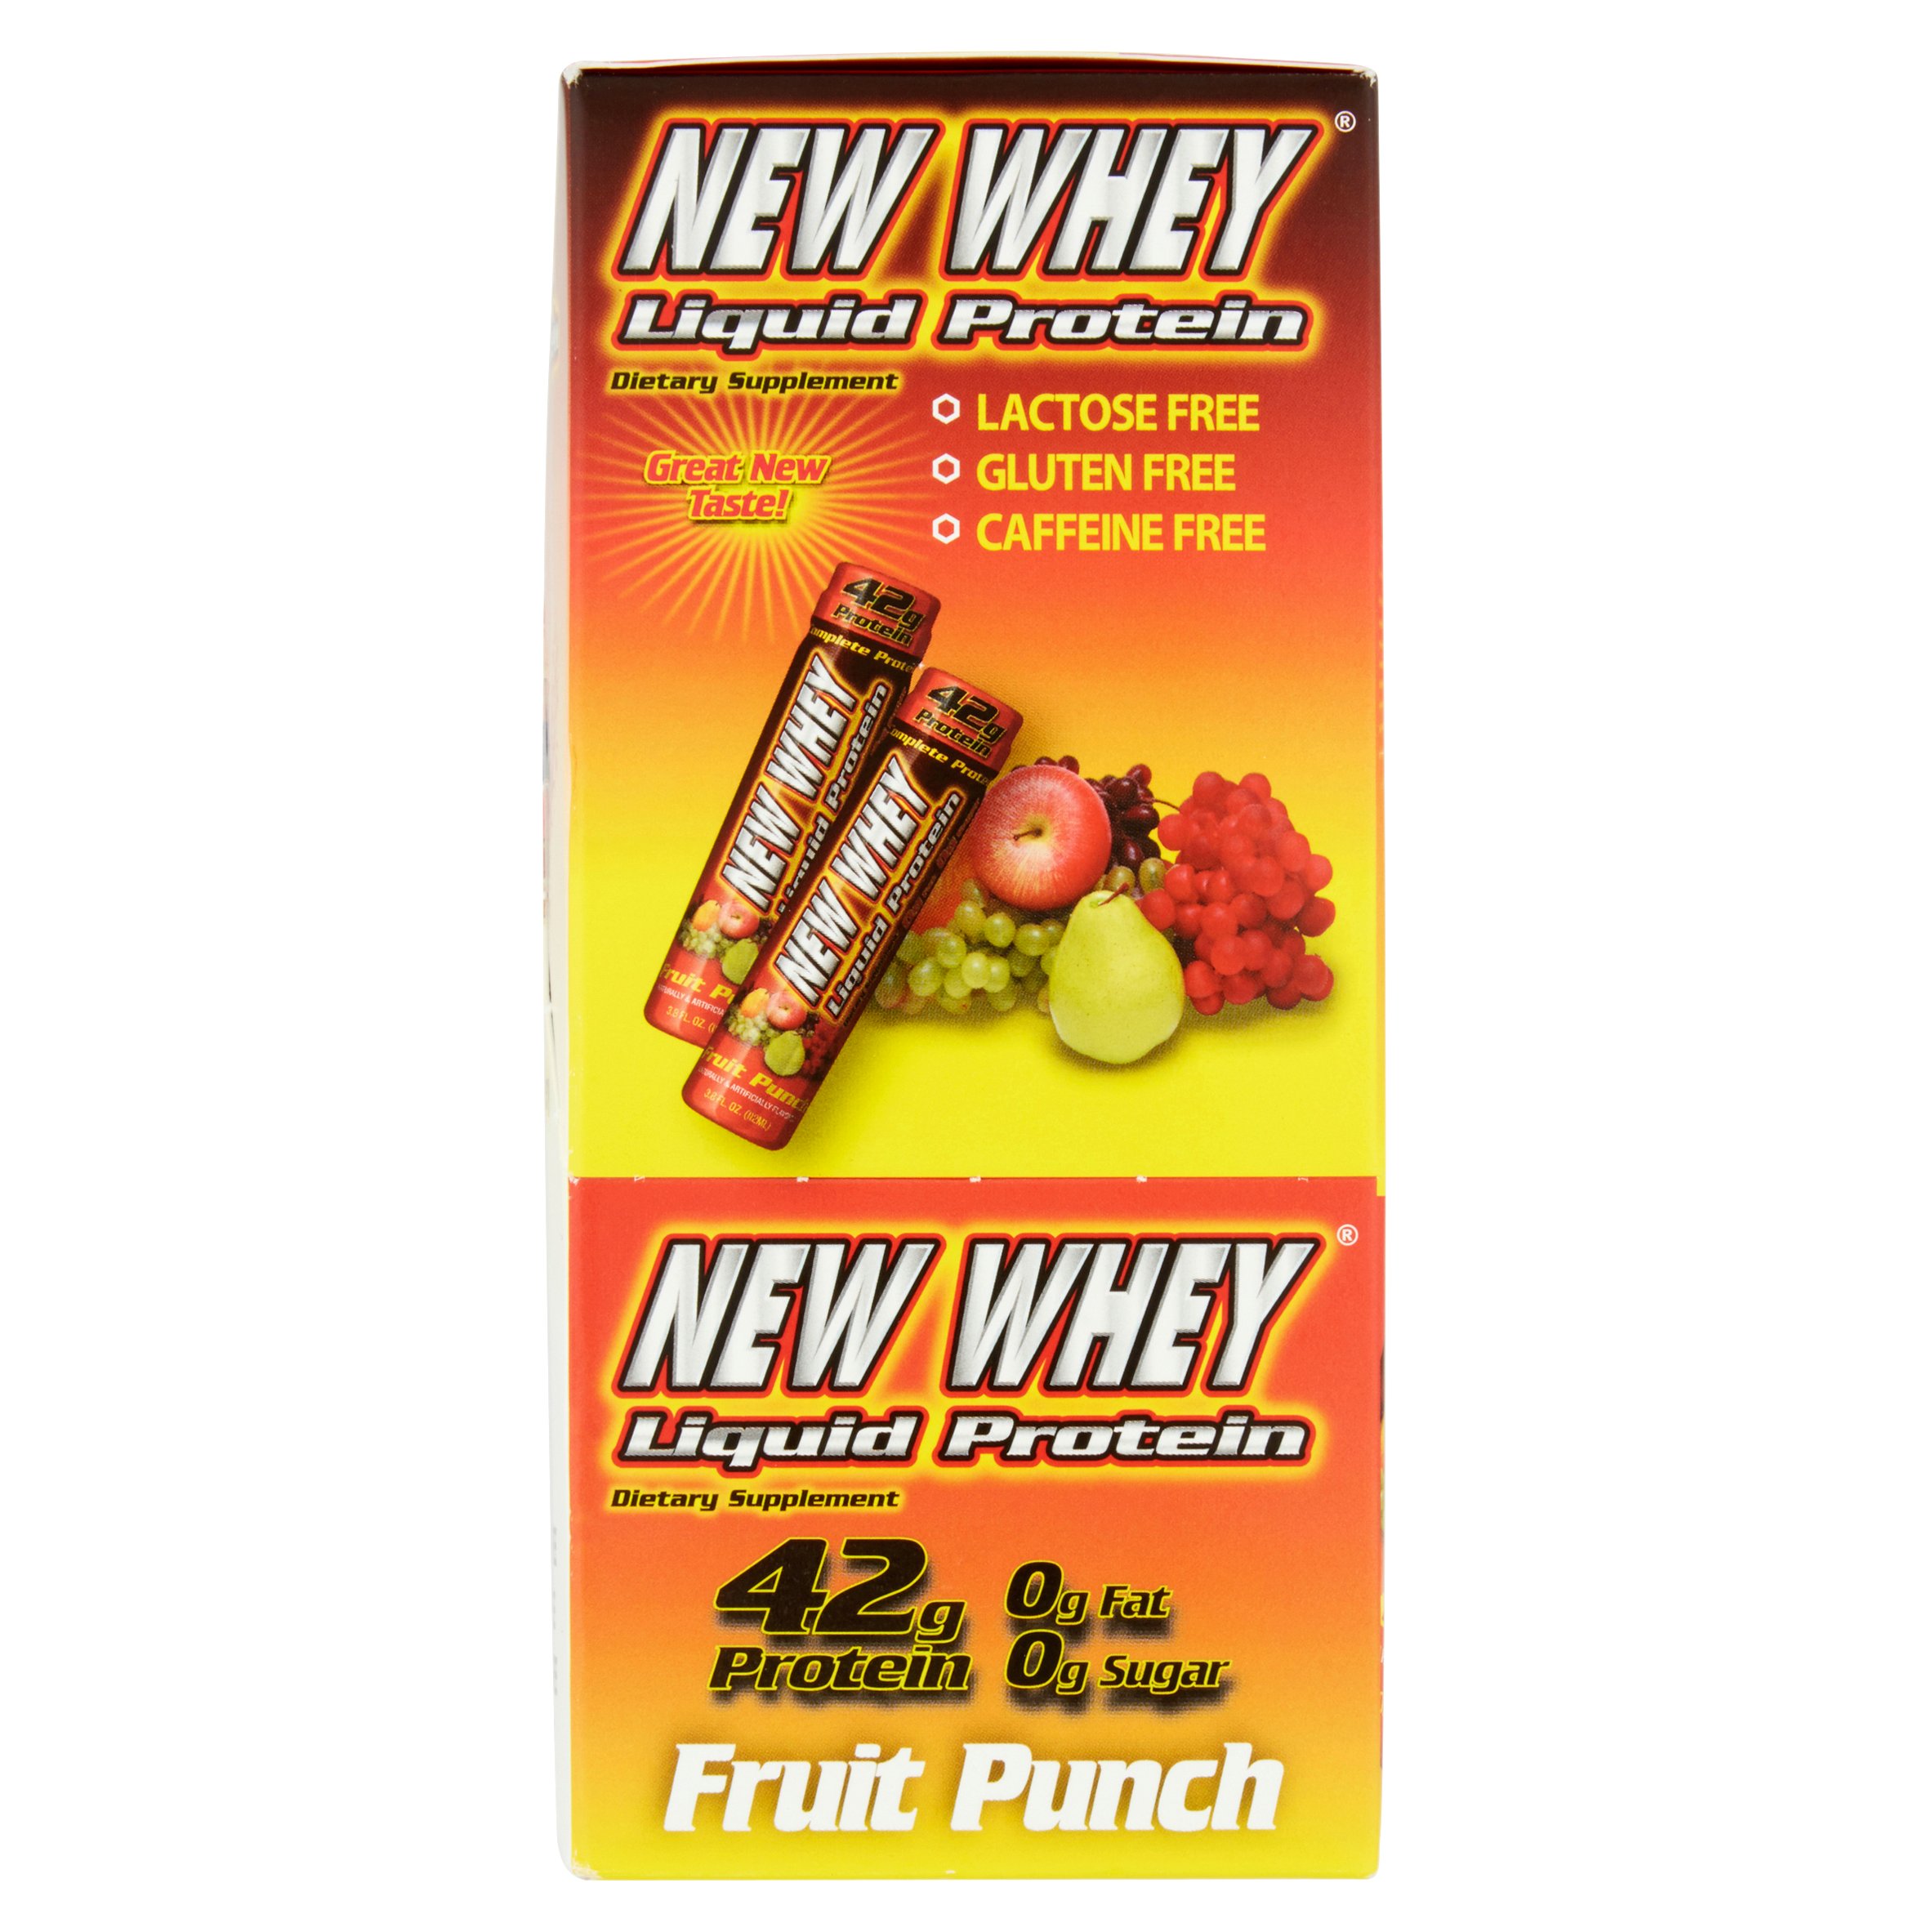 New Whey Protein Drink, 42 Grams of Protein, Fruit Punch, 3.8 Oz, 6 Ct - image 3 of 5